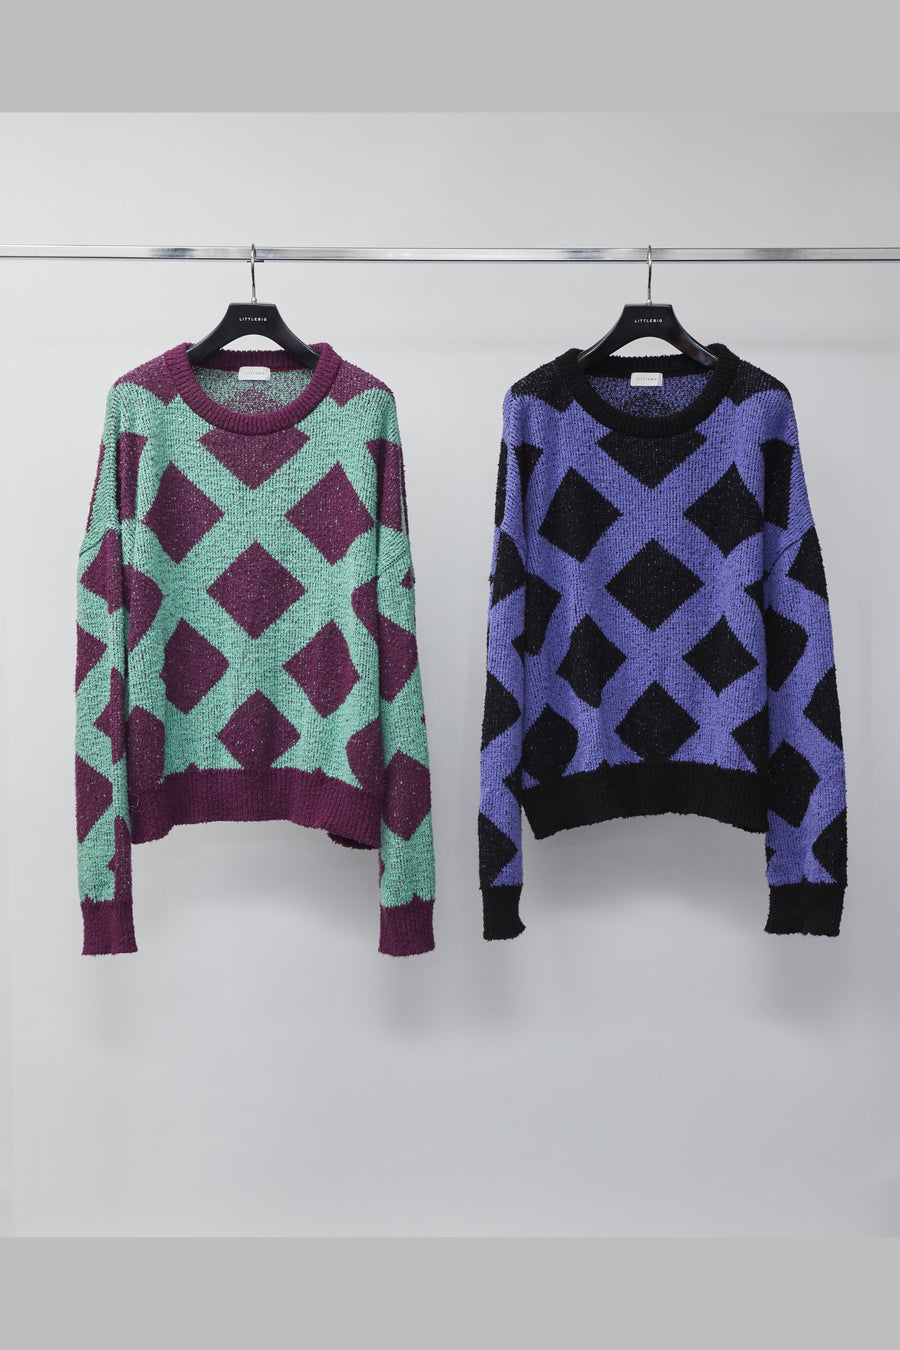 LITTLEBIG  Checked Knit(Green or Purple)